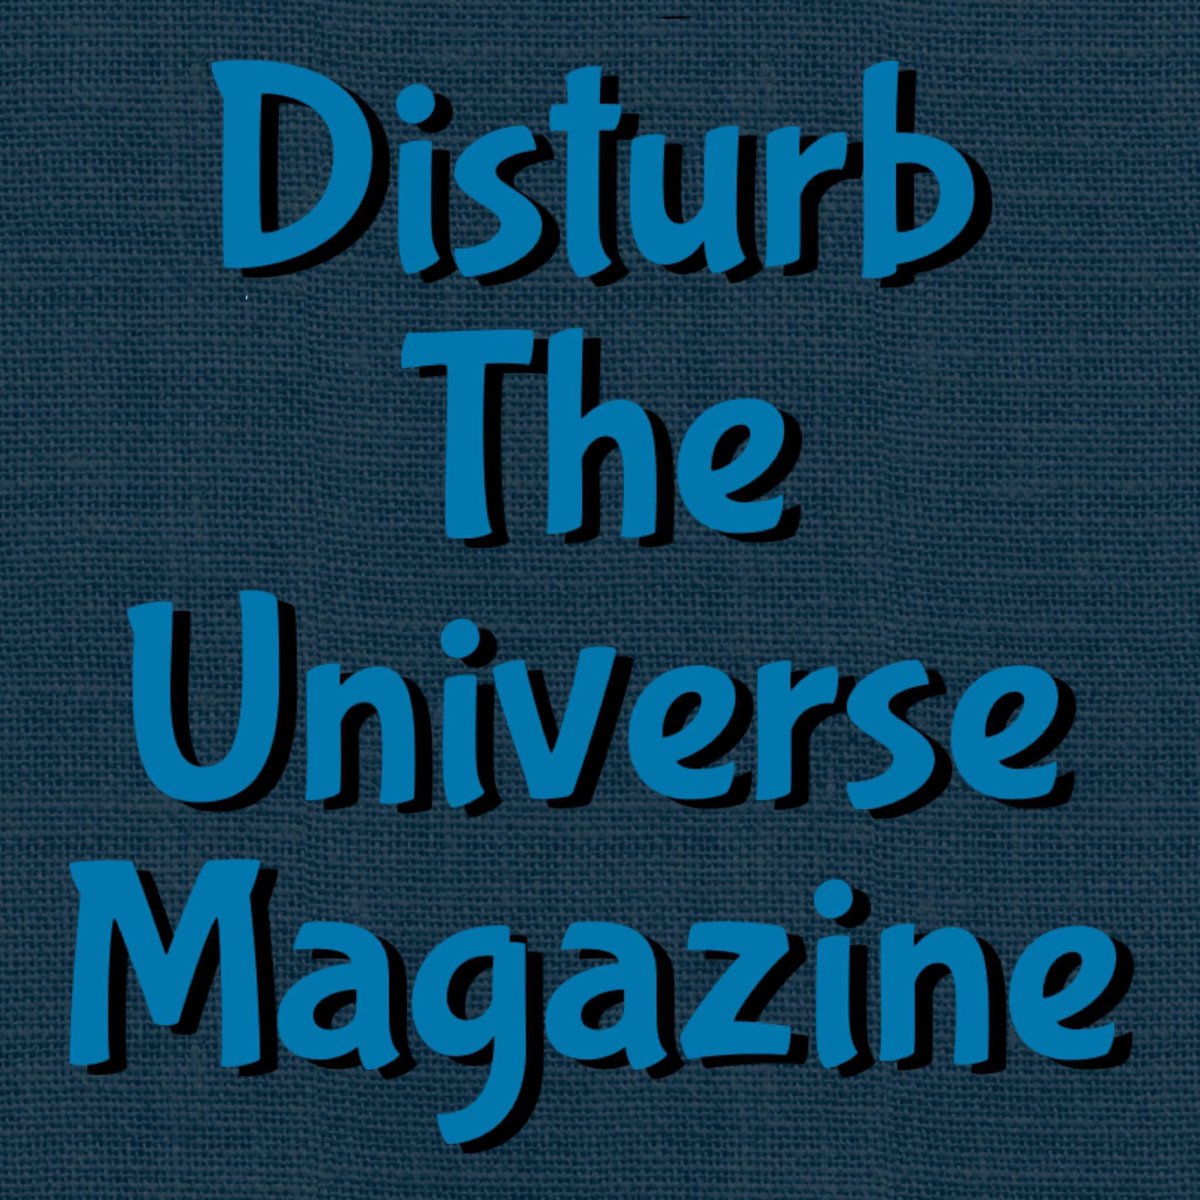 Up today at Disturb The Universe Magazine

Dearest Lepidopterist by Kelly Moyer

disturbtheuniversemagazine.com/2024/03/deares…

#publishedwriting #disturbtheuniversemagazine #published #writingcommunity #poetry #writing #publishedpoetry #poetrylovers #poetrytwitter #poetrycommunity